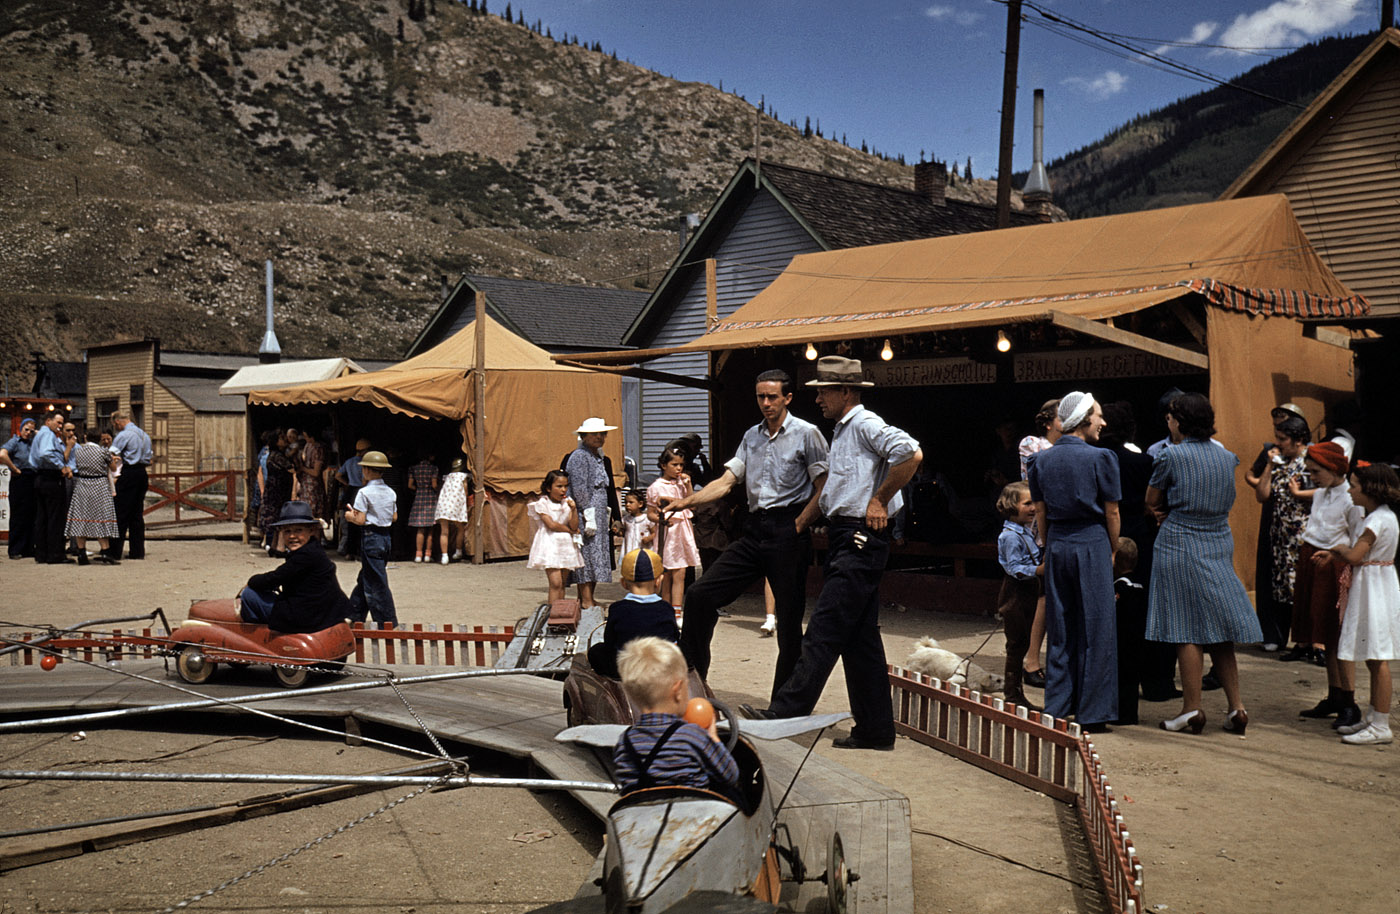 October 1940. Fun at the Delta County Fair in western Colorado. View full size. 35mm Kodachrome transparency by Russell Lee, Farm Security Administration.